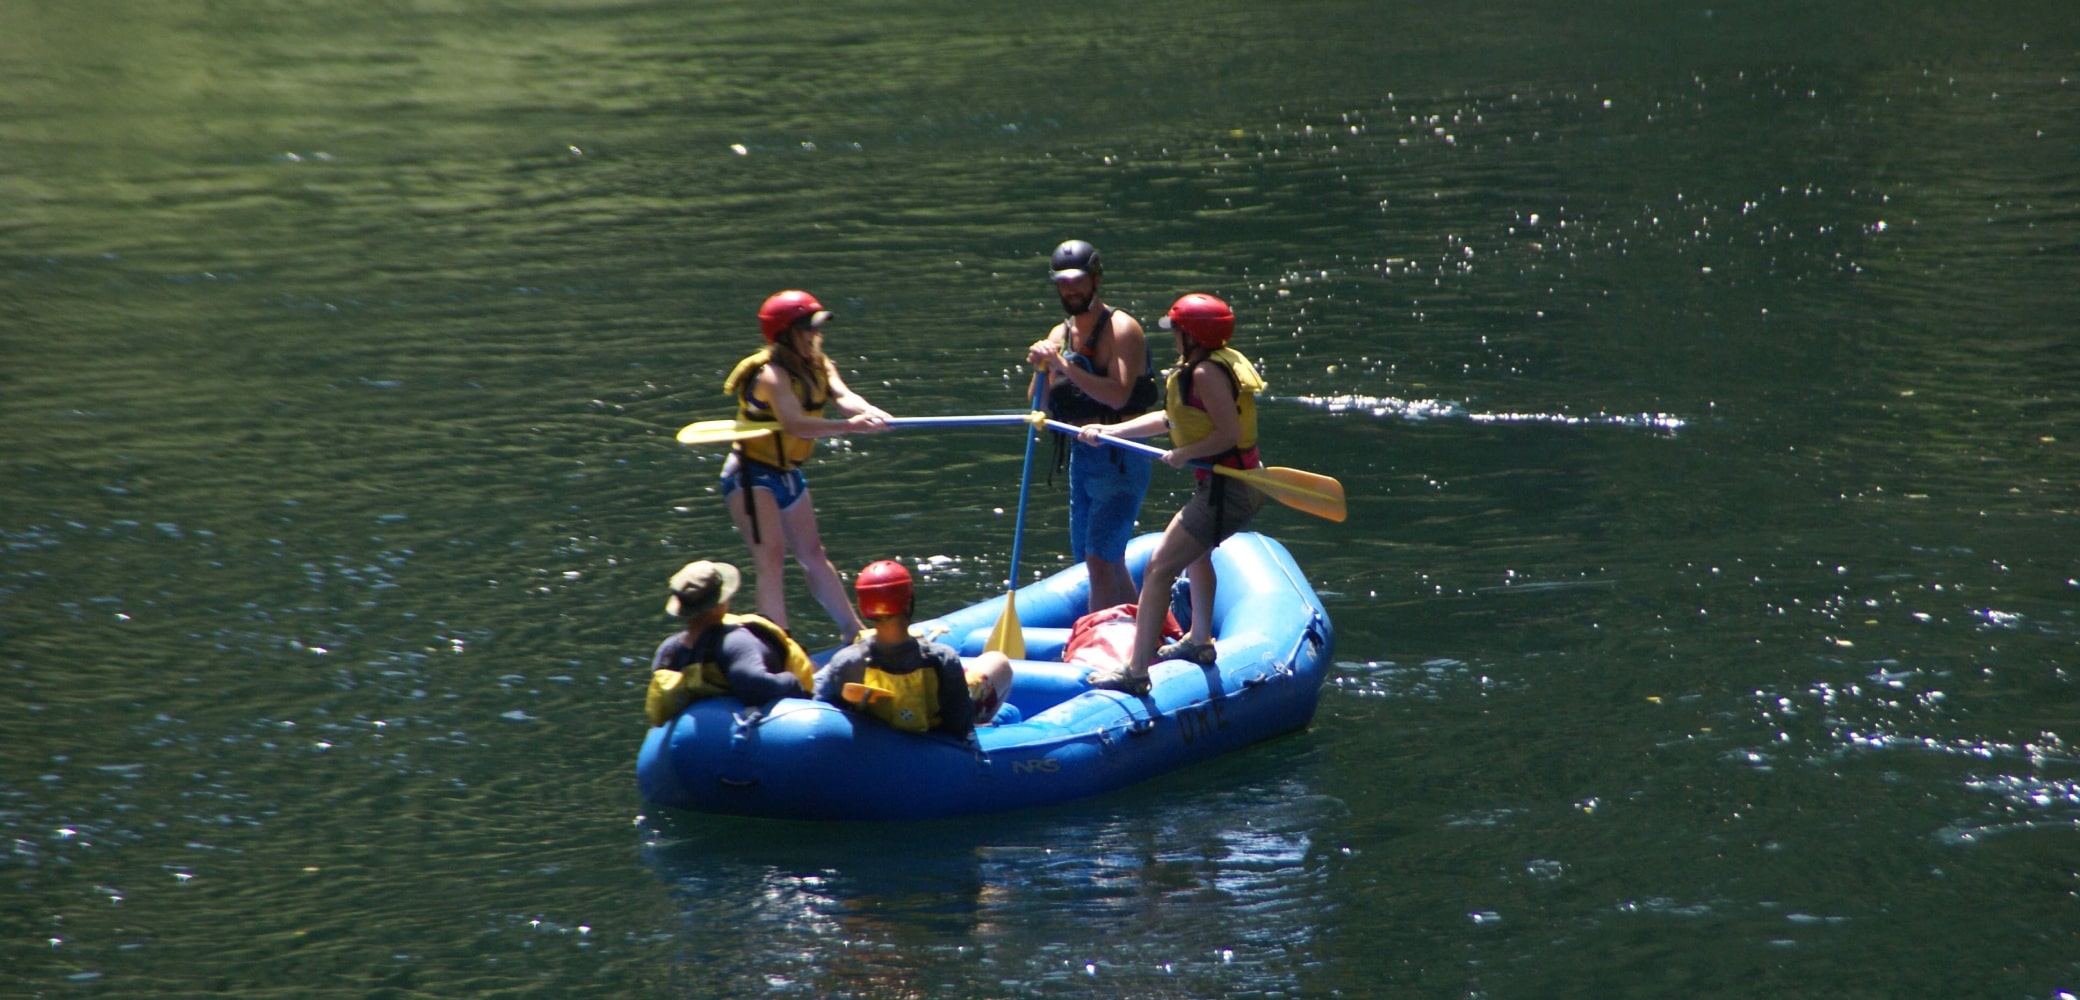 A group of five river rafters in a blue raft balance an oar in their boat along the Sandy River.